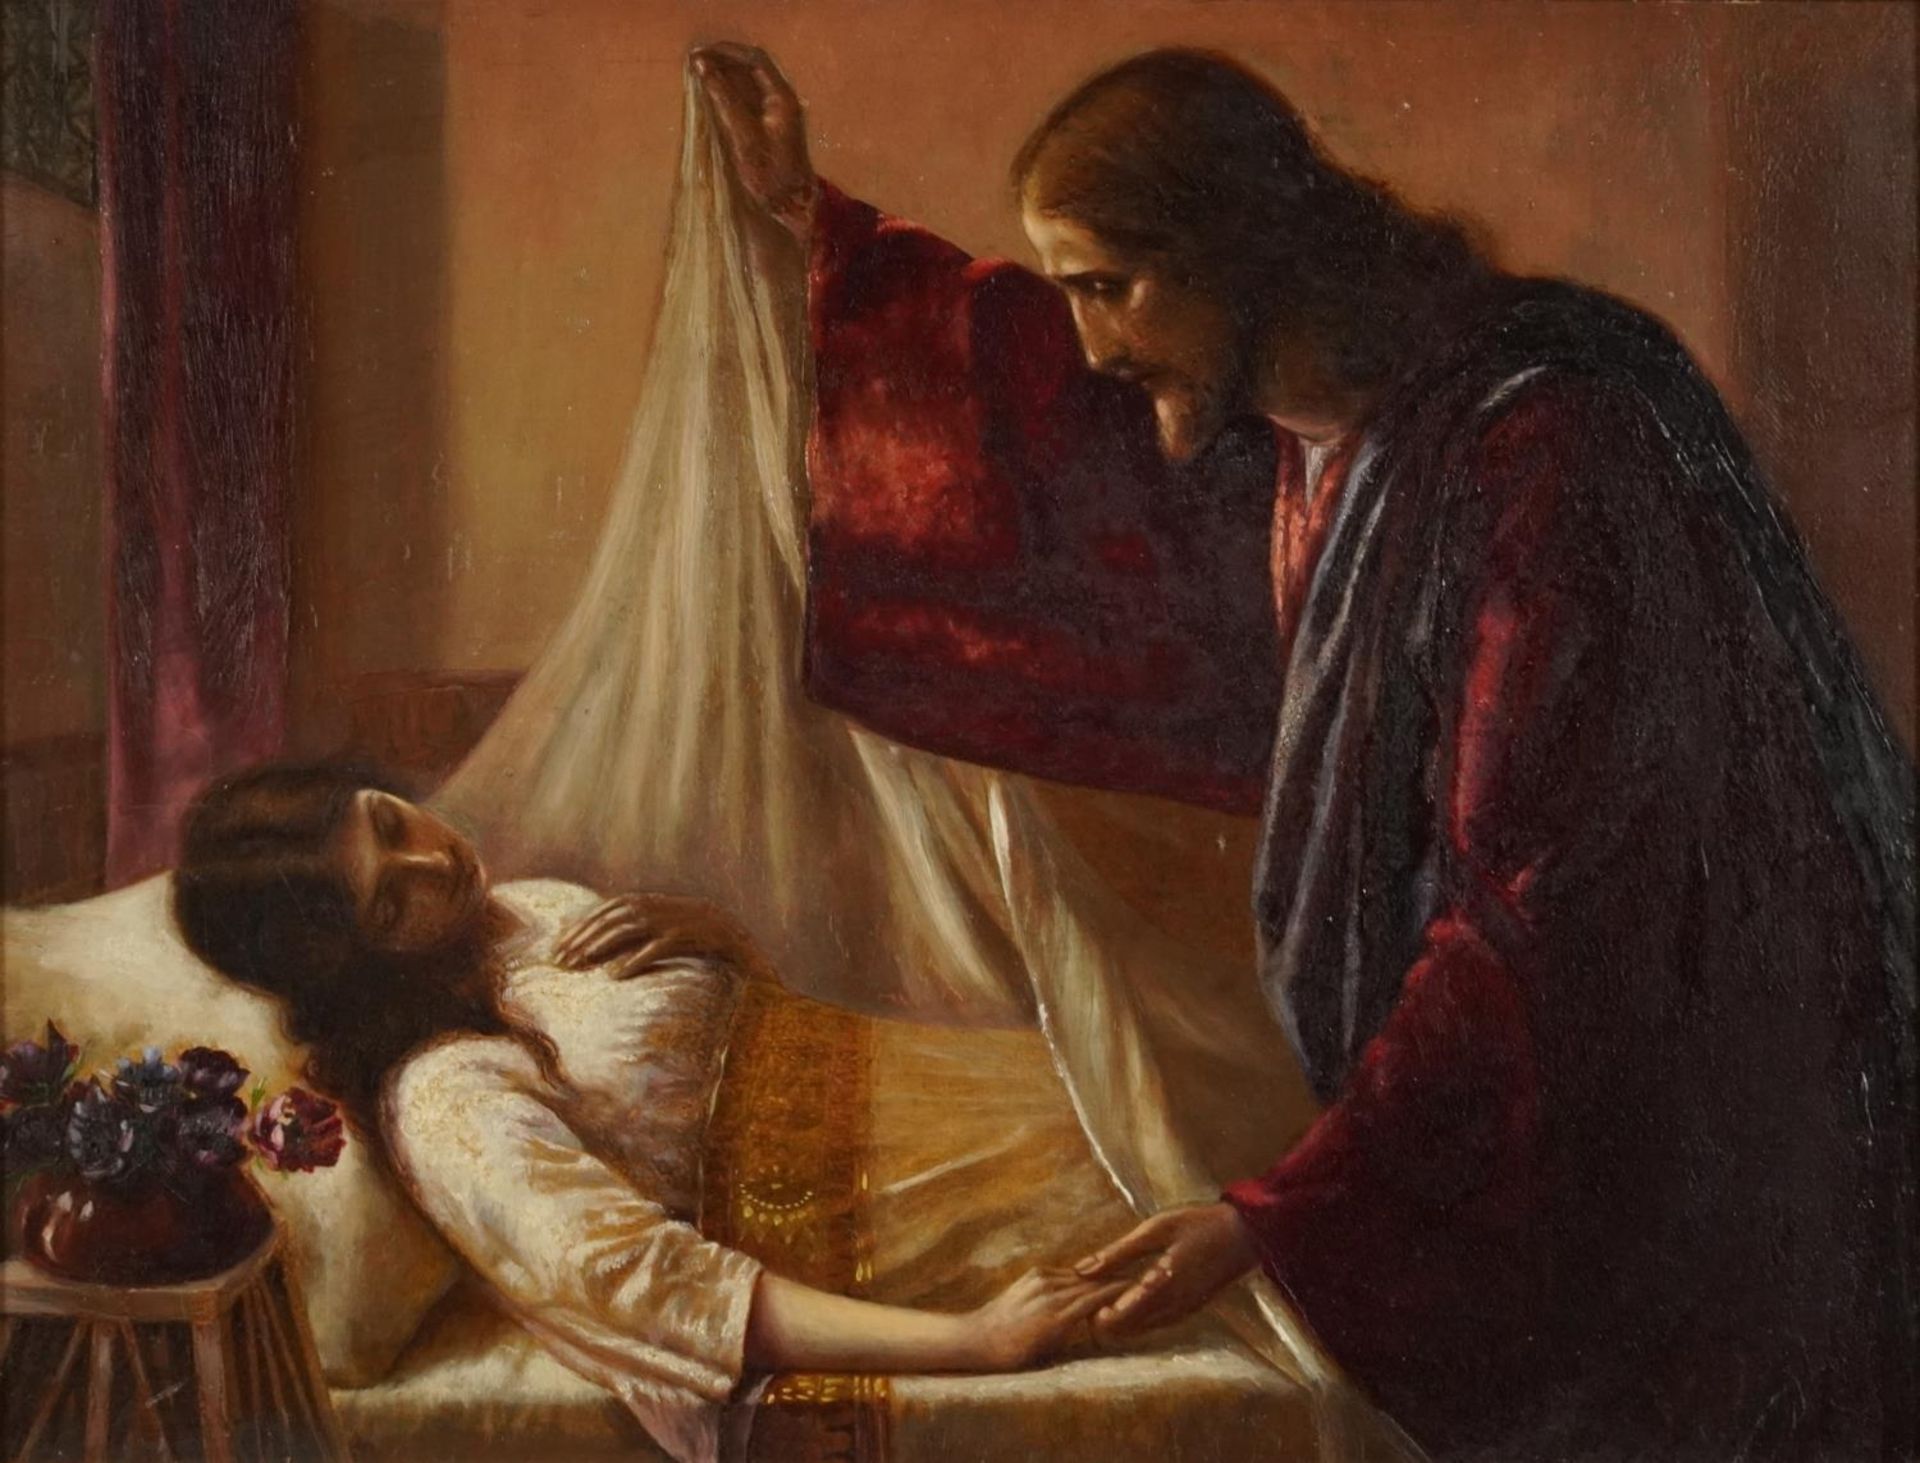 Jesus beside reclining female, old master style oil on board, mounted and framed, 37cm x 28cm